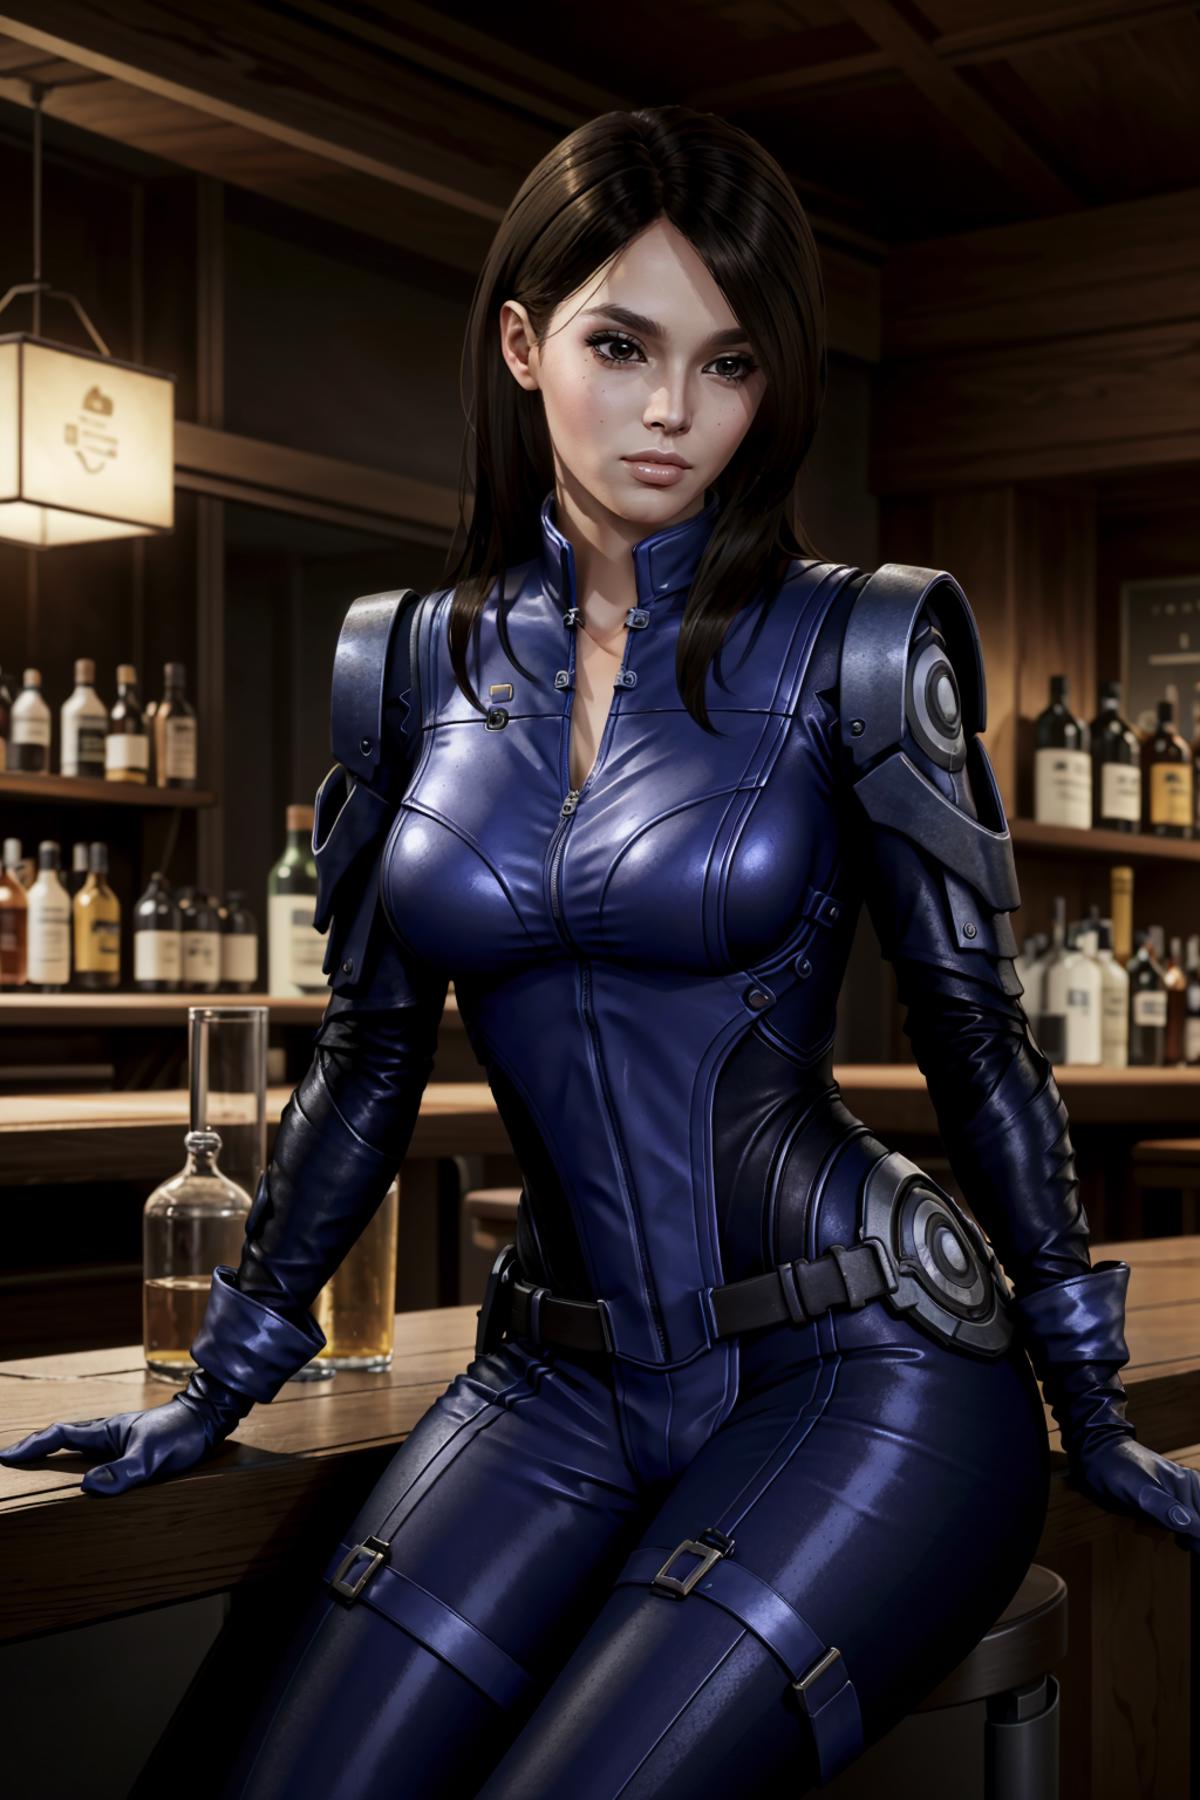 Ashley from Mass Effect image by BloodRedKittie